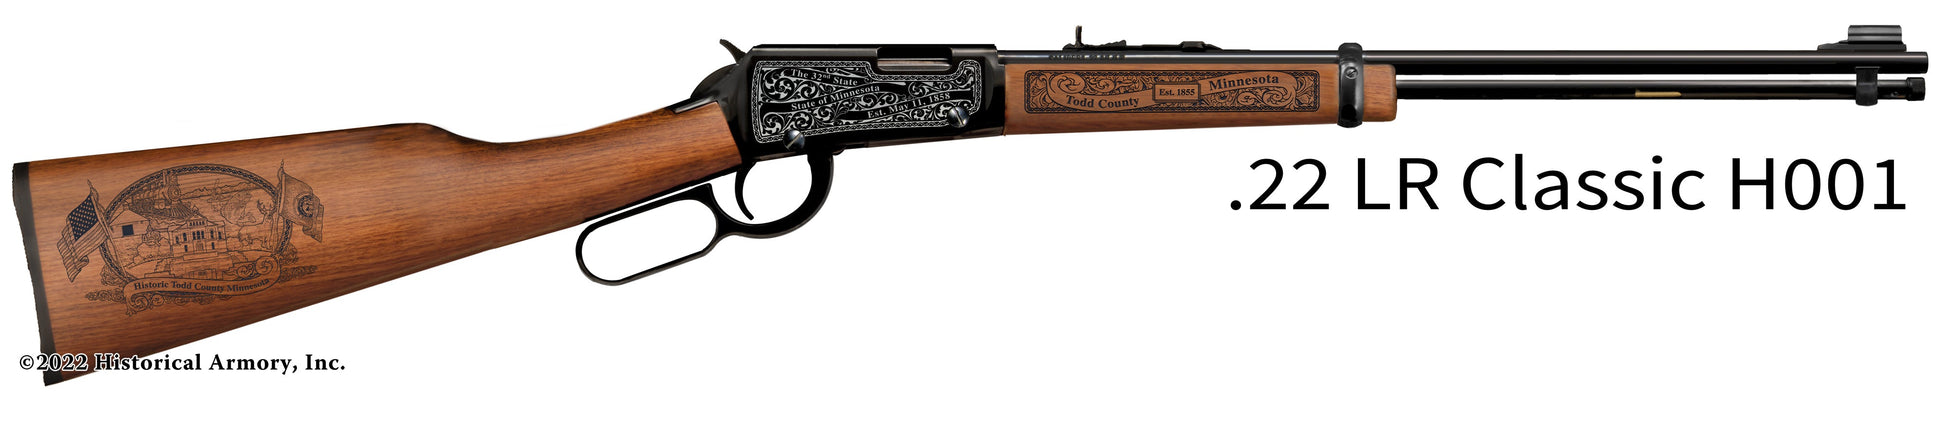 Todd County Minnesota Engraved Henry H001 Rifle